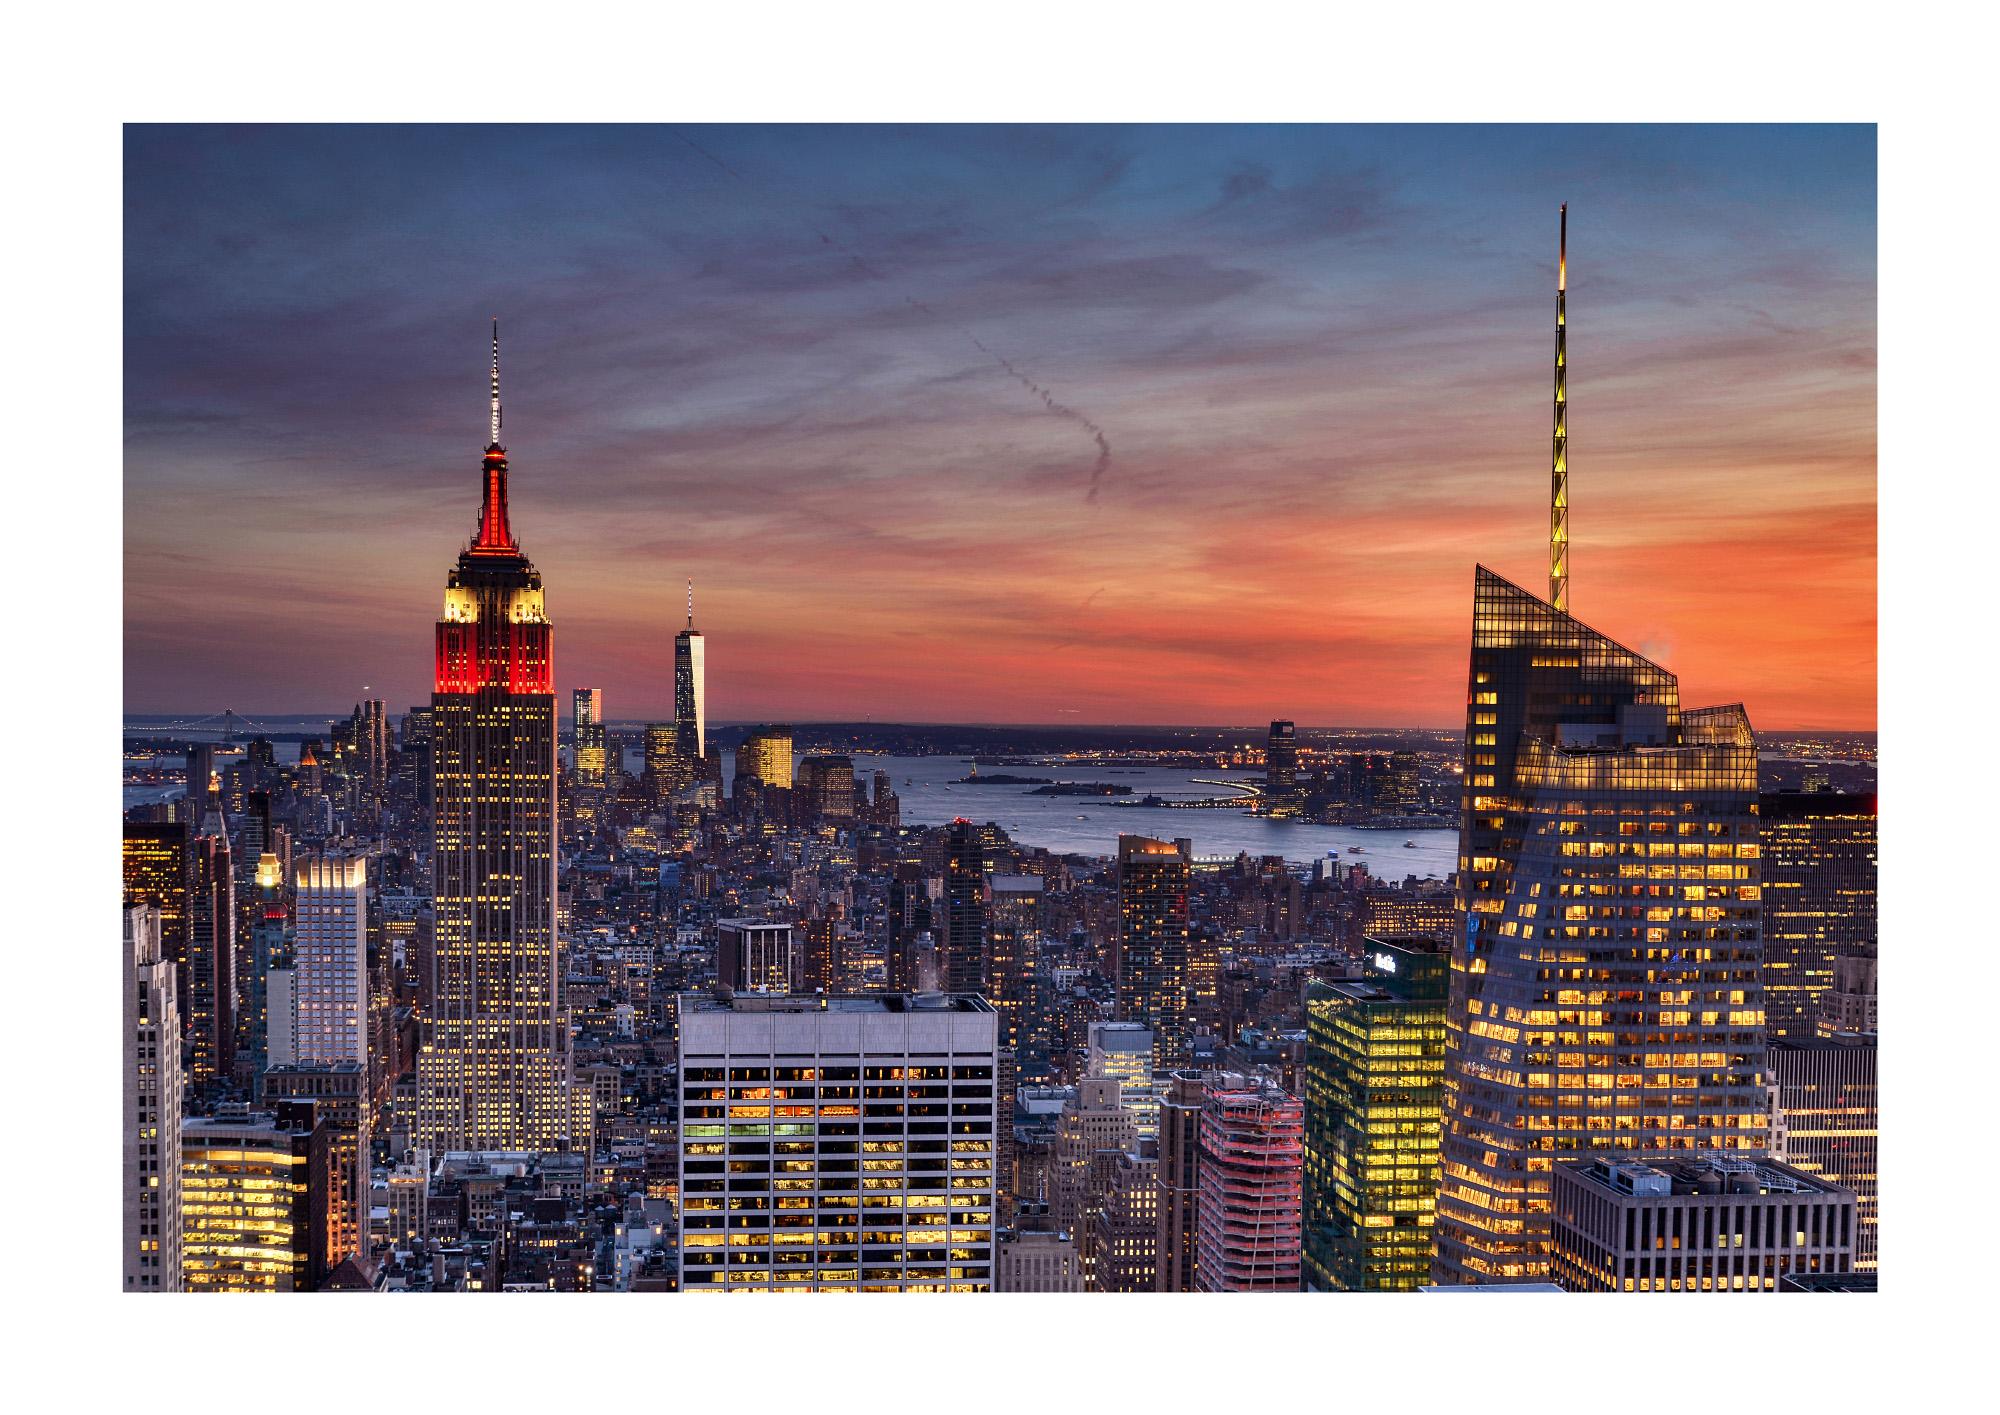 New York Manhattan Landscape, Color Photography Fine Art Print by Rainer Martini In New Condition For Sale In Epfach, DE